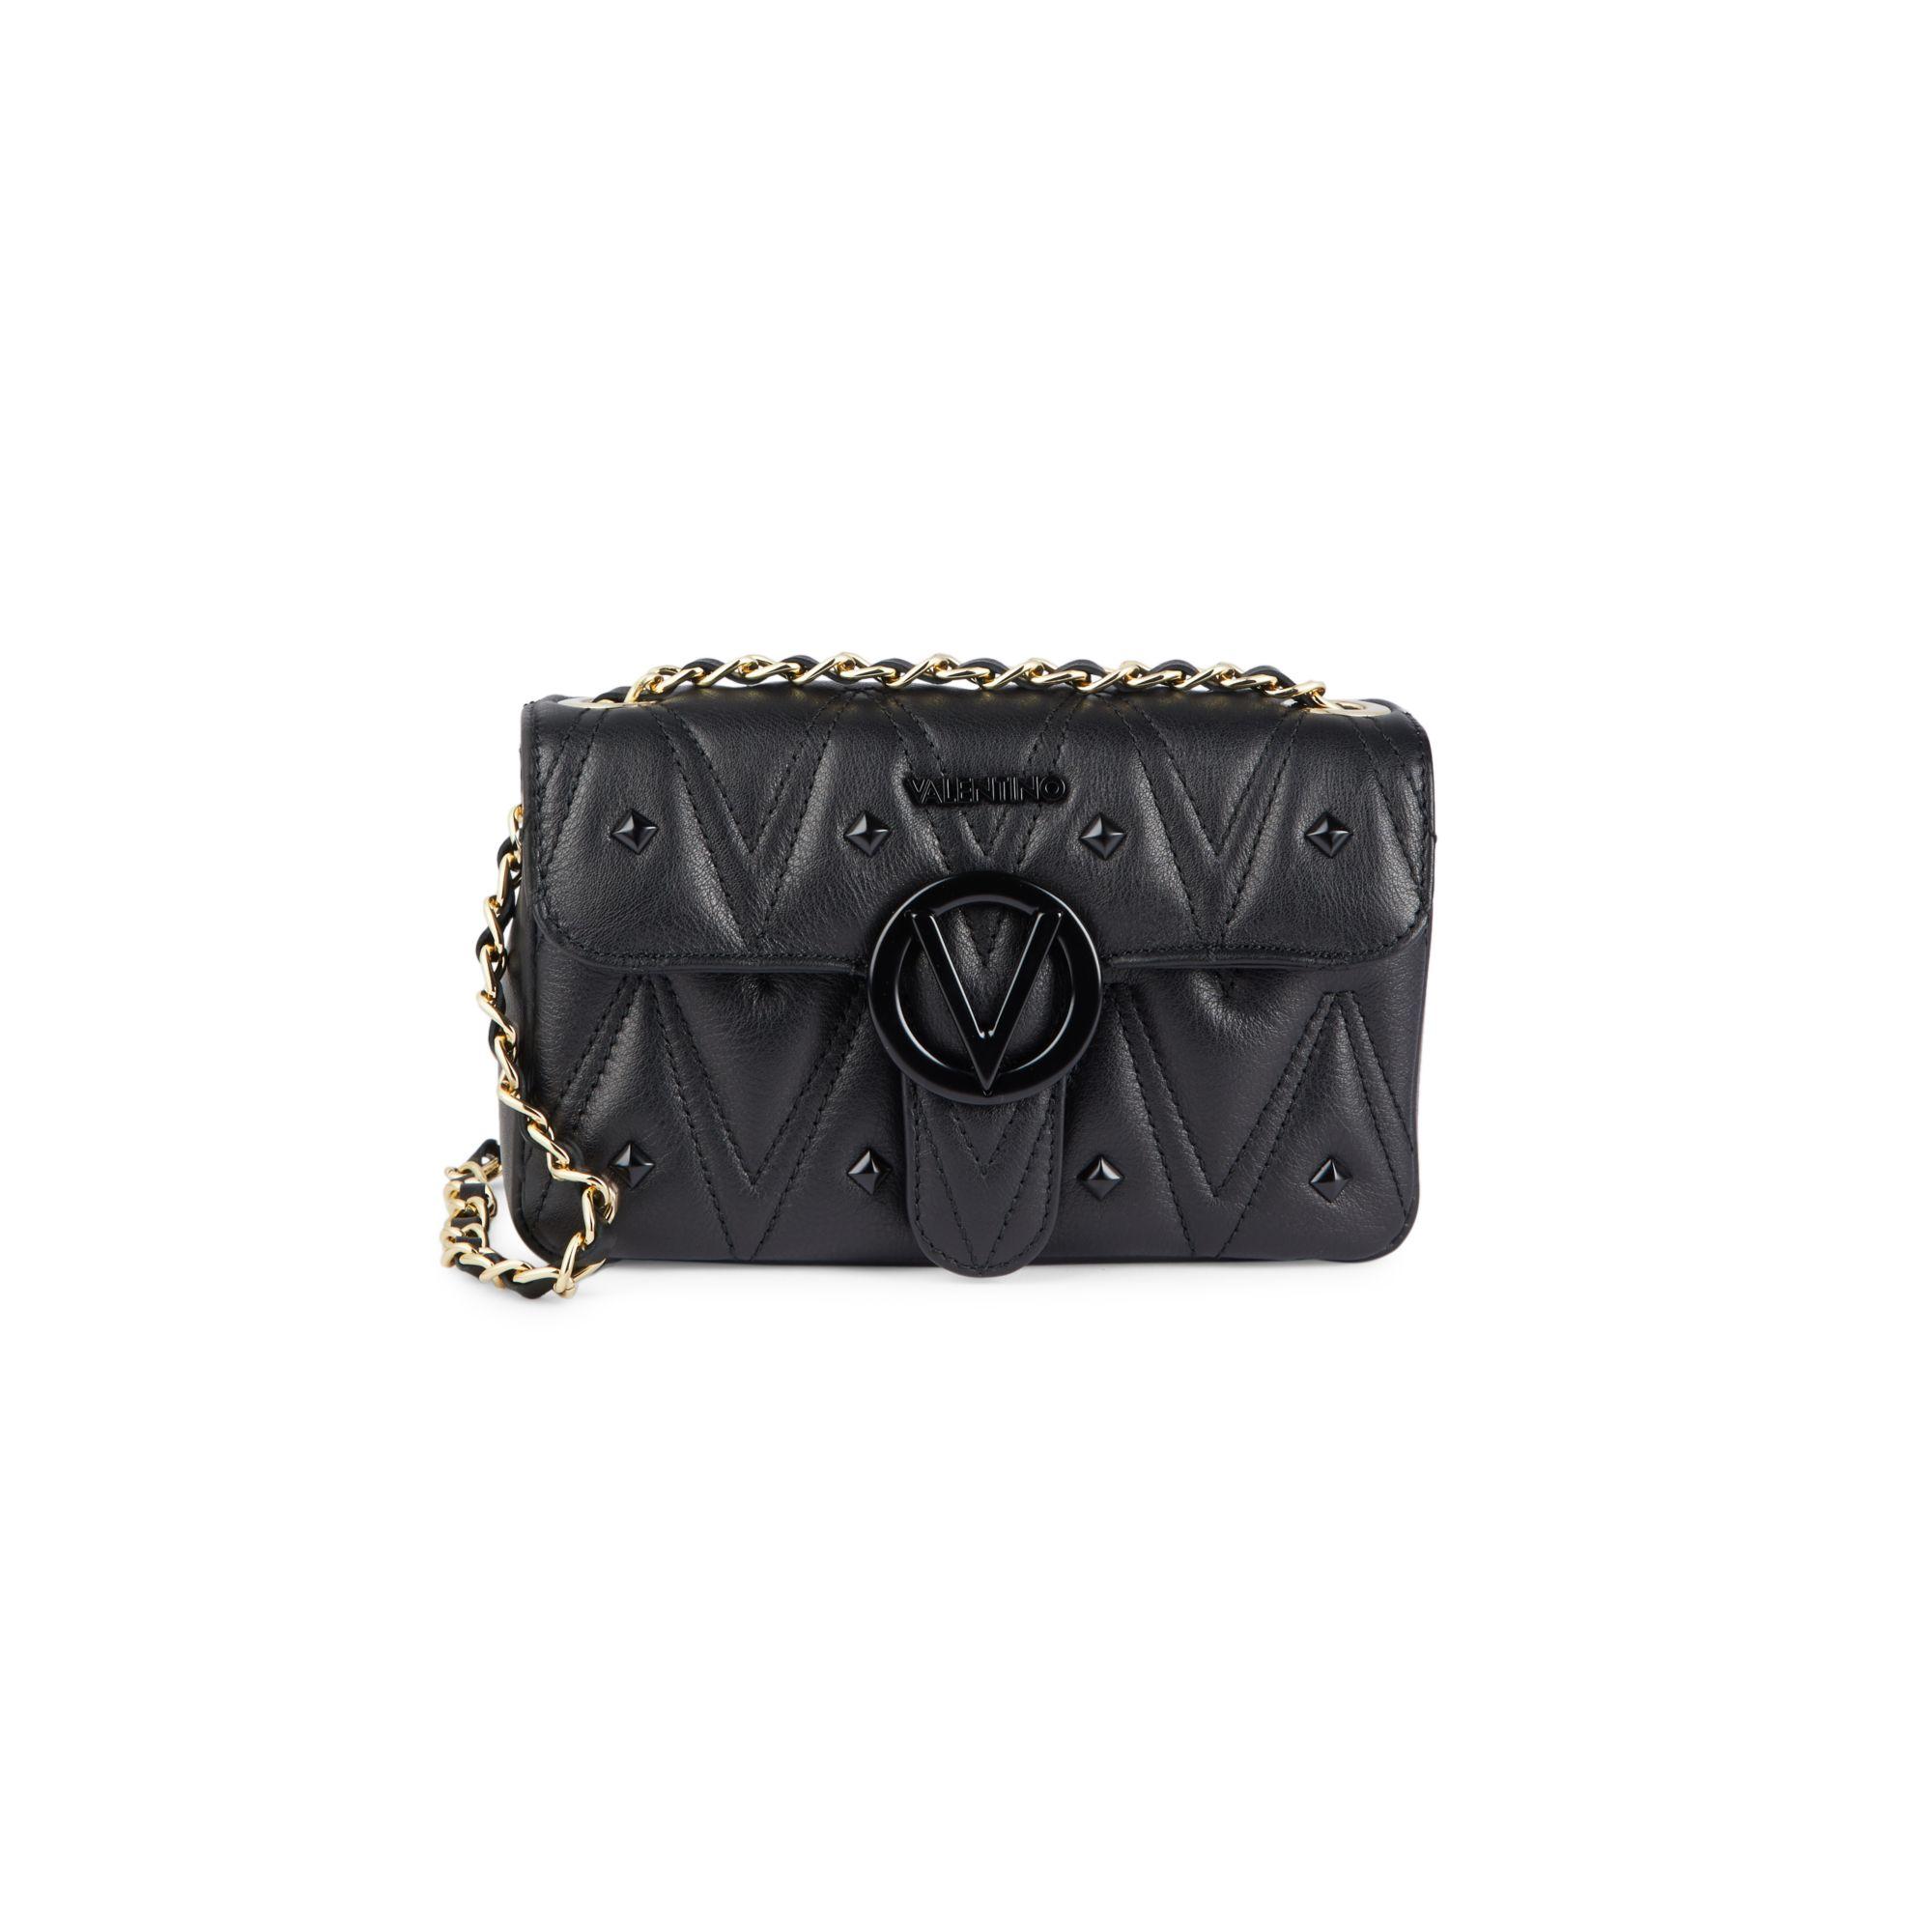 Valentino By Mario Valentino Poisson Quilted Leather Crossbody Bag in Black  - Lyst